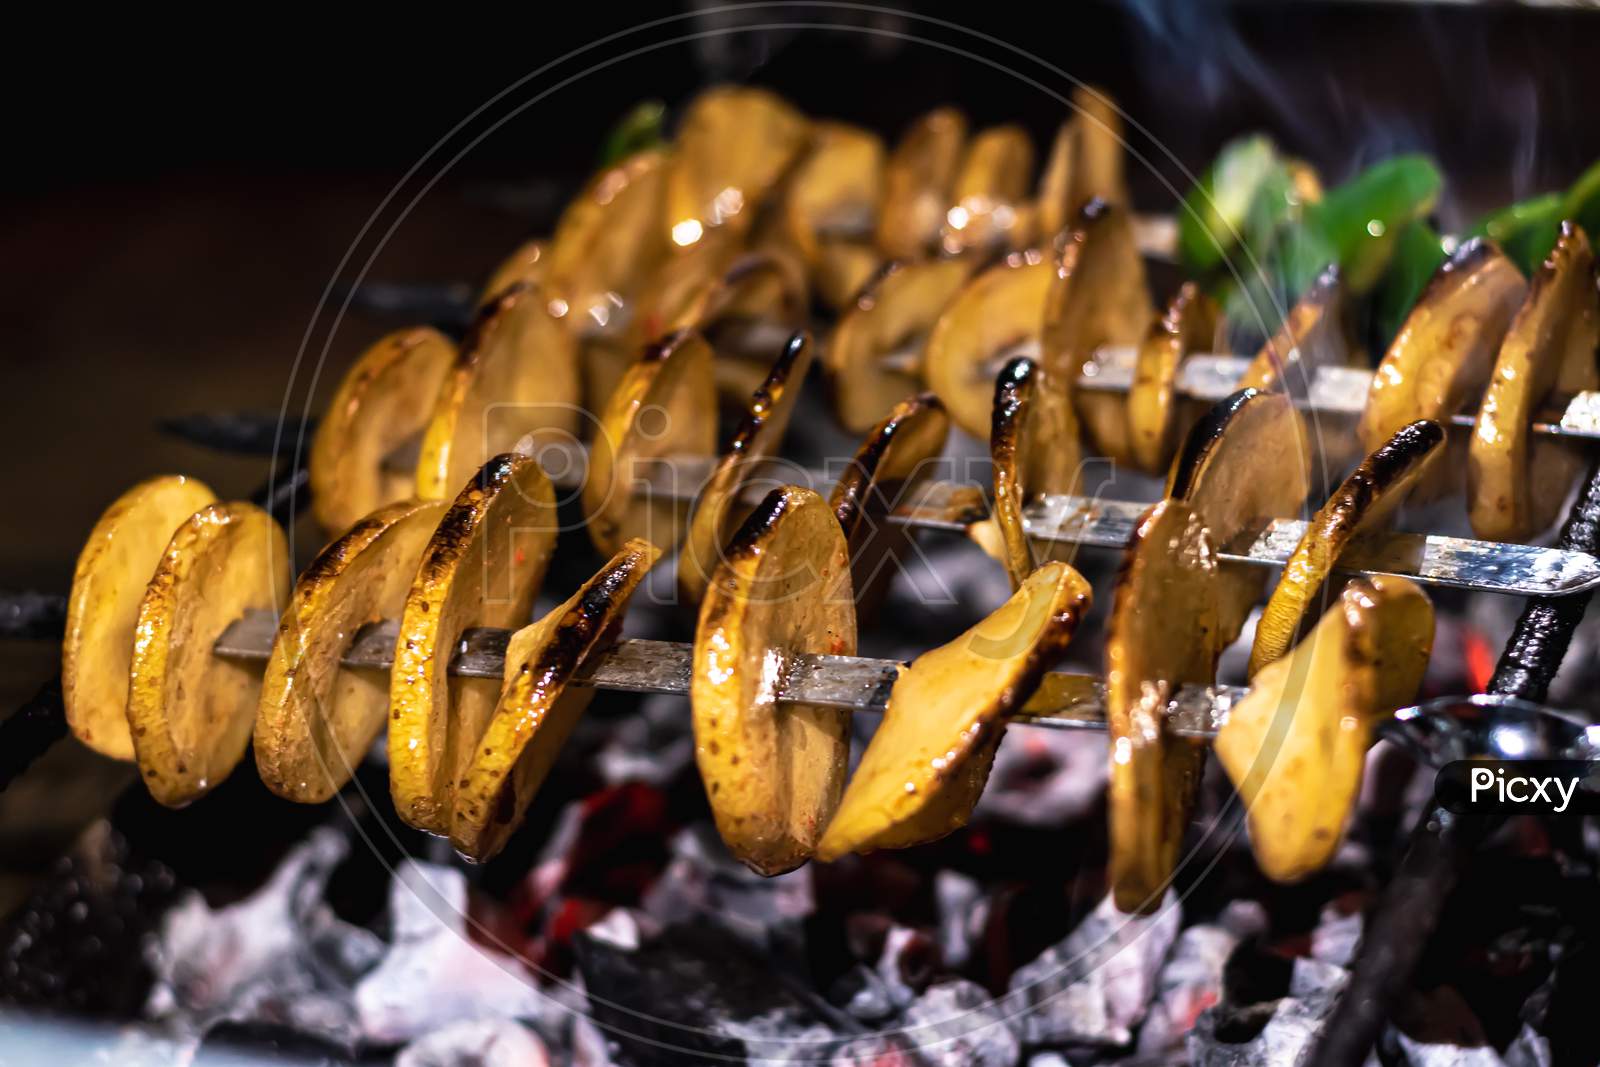 Delicious Vegetarian Skewers Made From Potatoes And Capsicum Over The Coals On A Barbecue